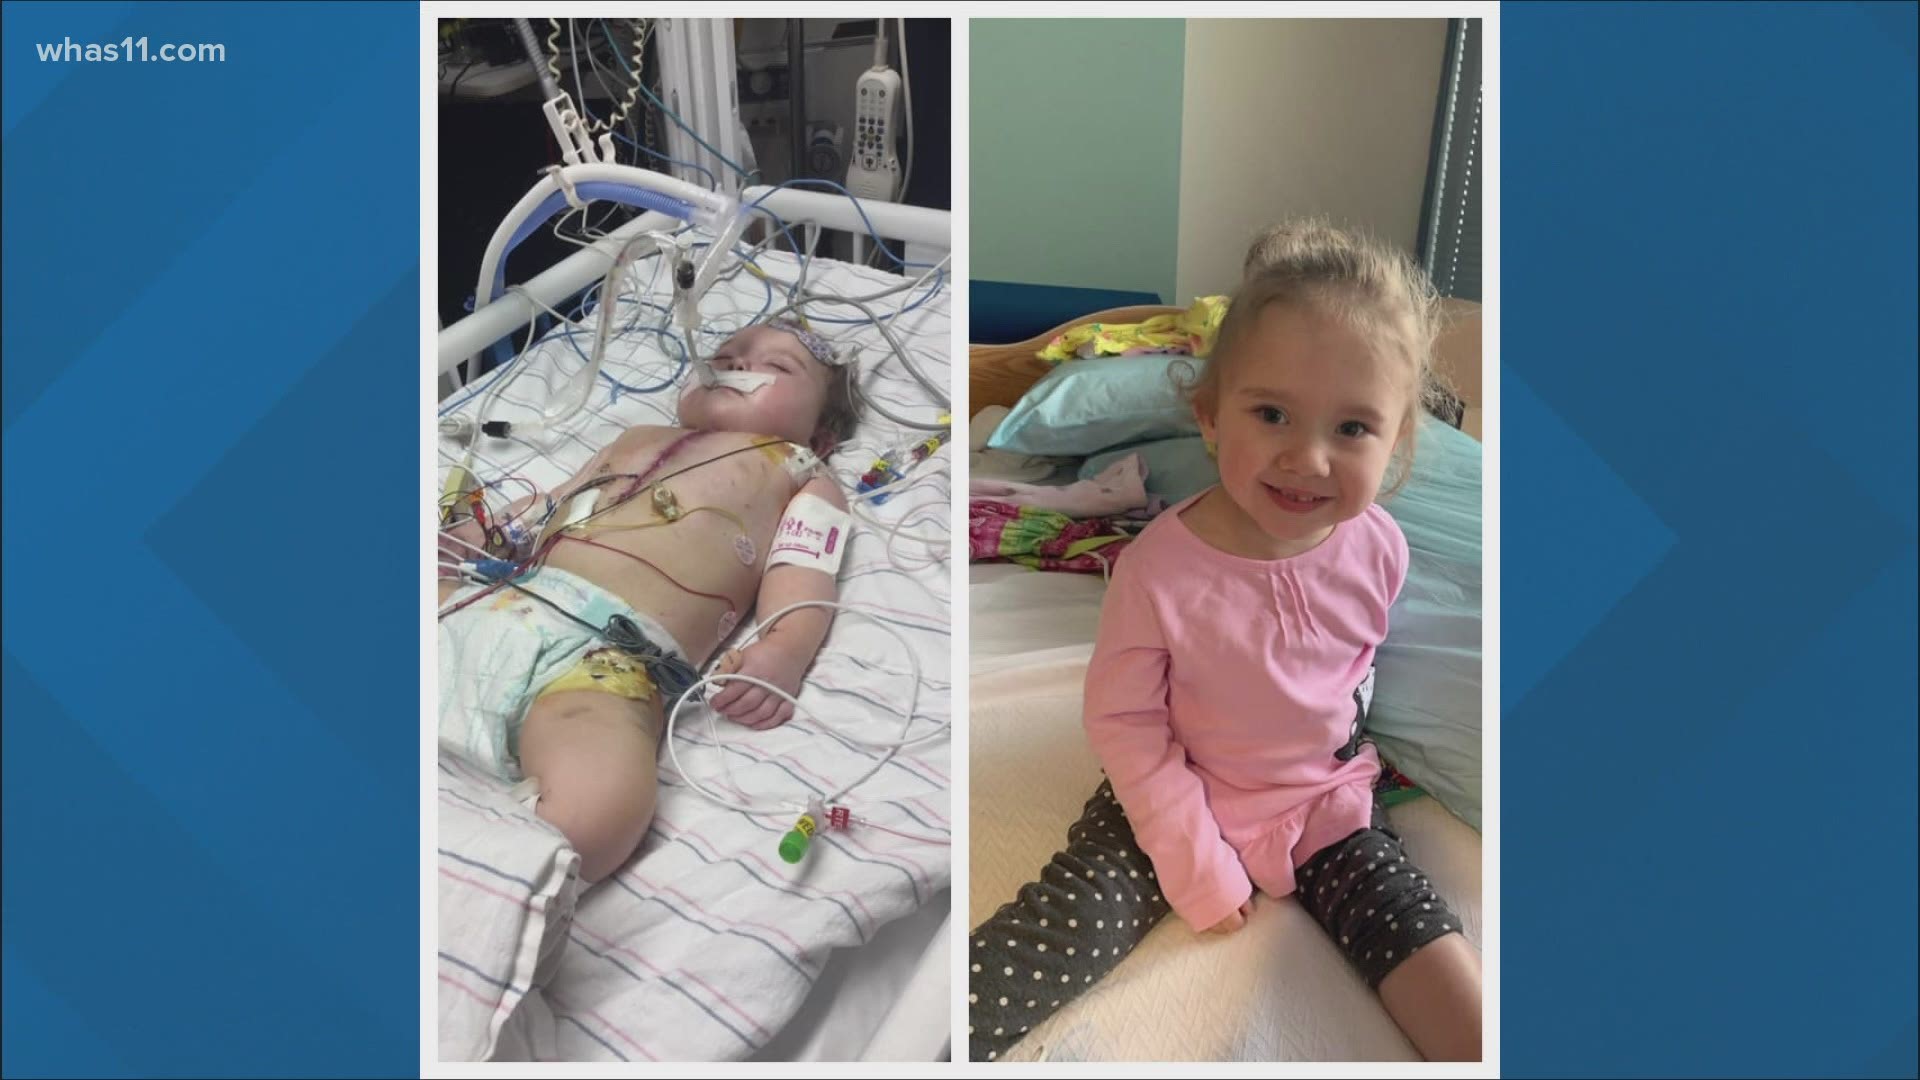 At 16 months old, she had a life saving surgery but the time since has showed it takes more than one surgery to help someone thrive.